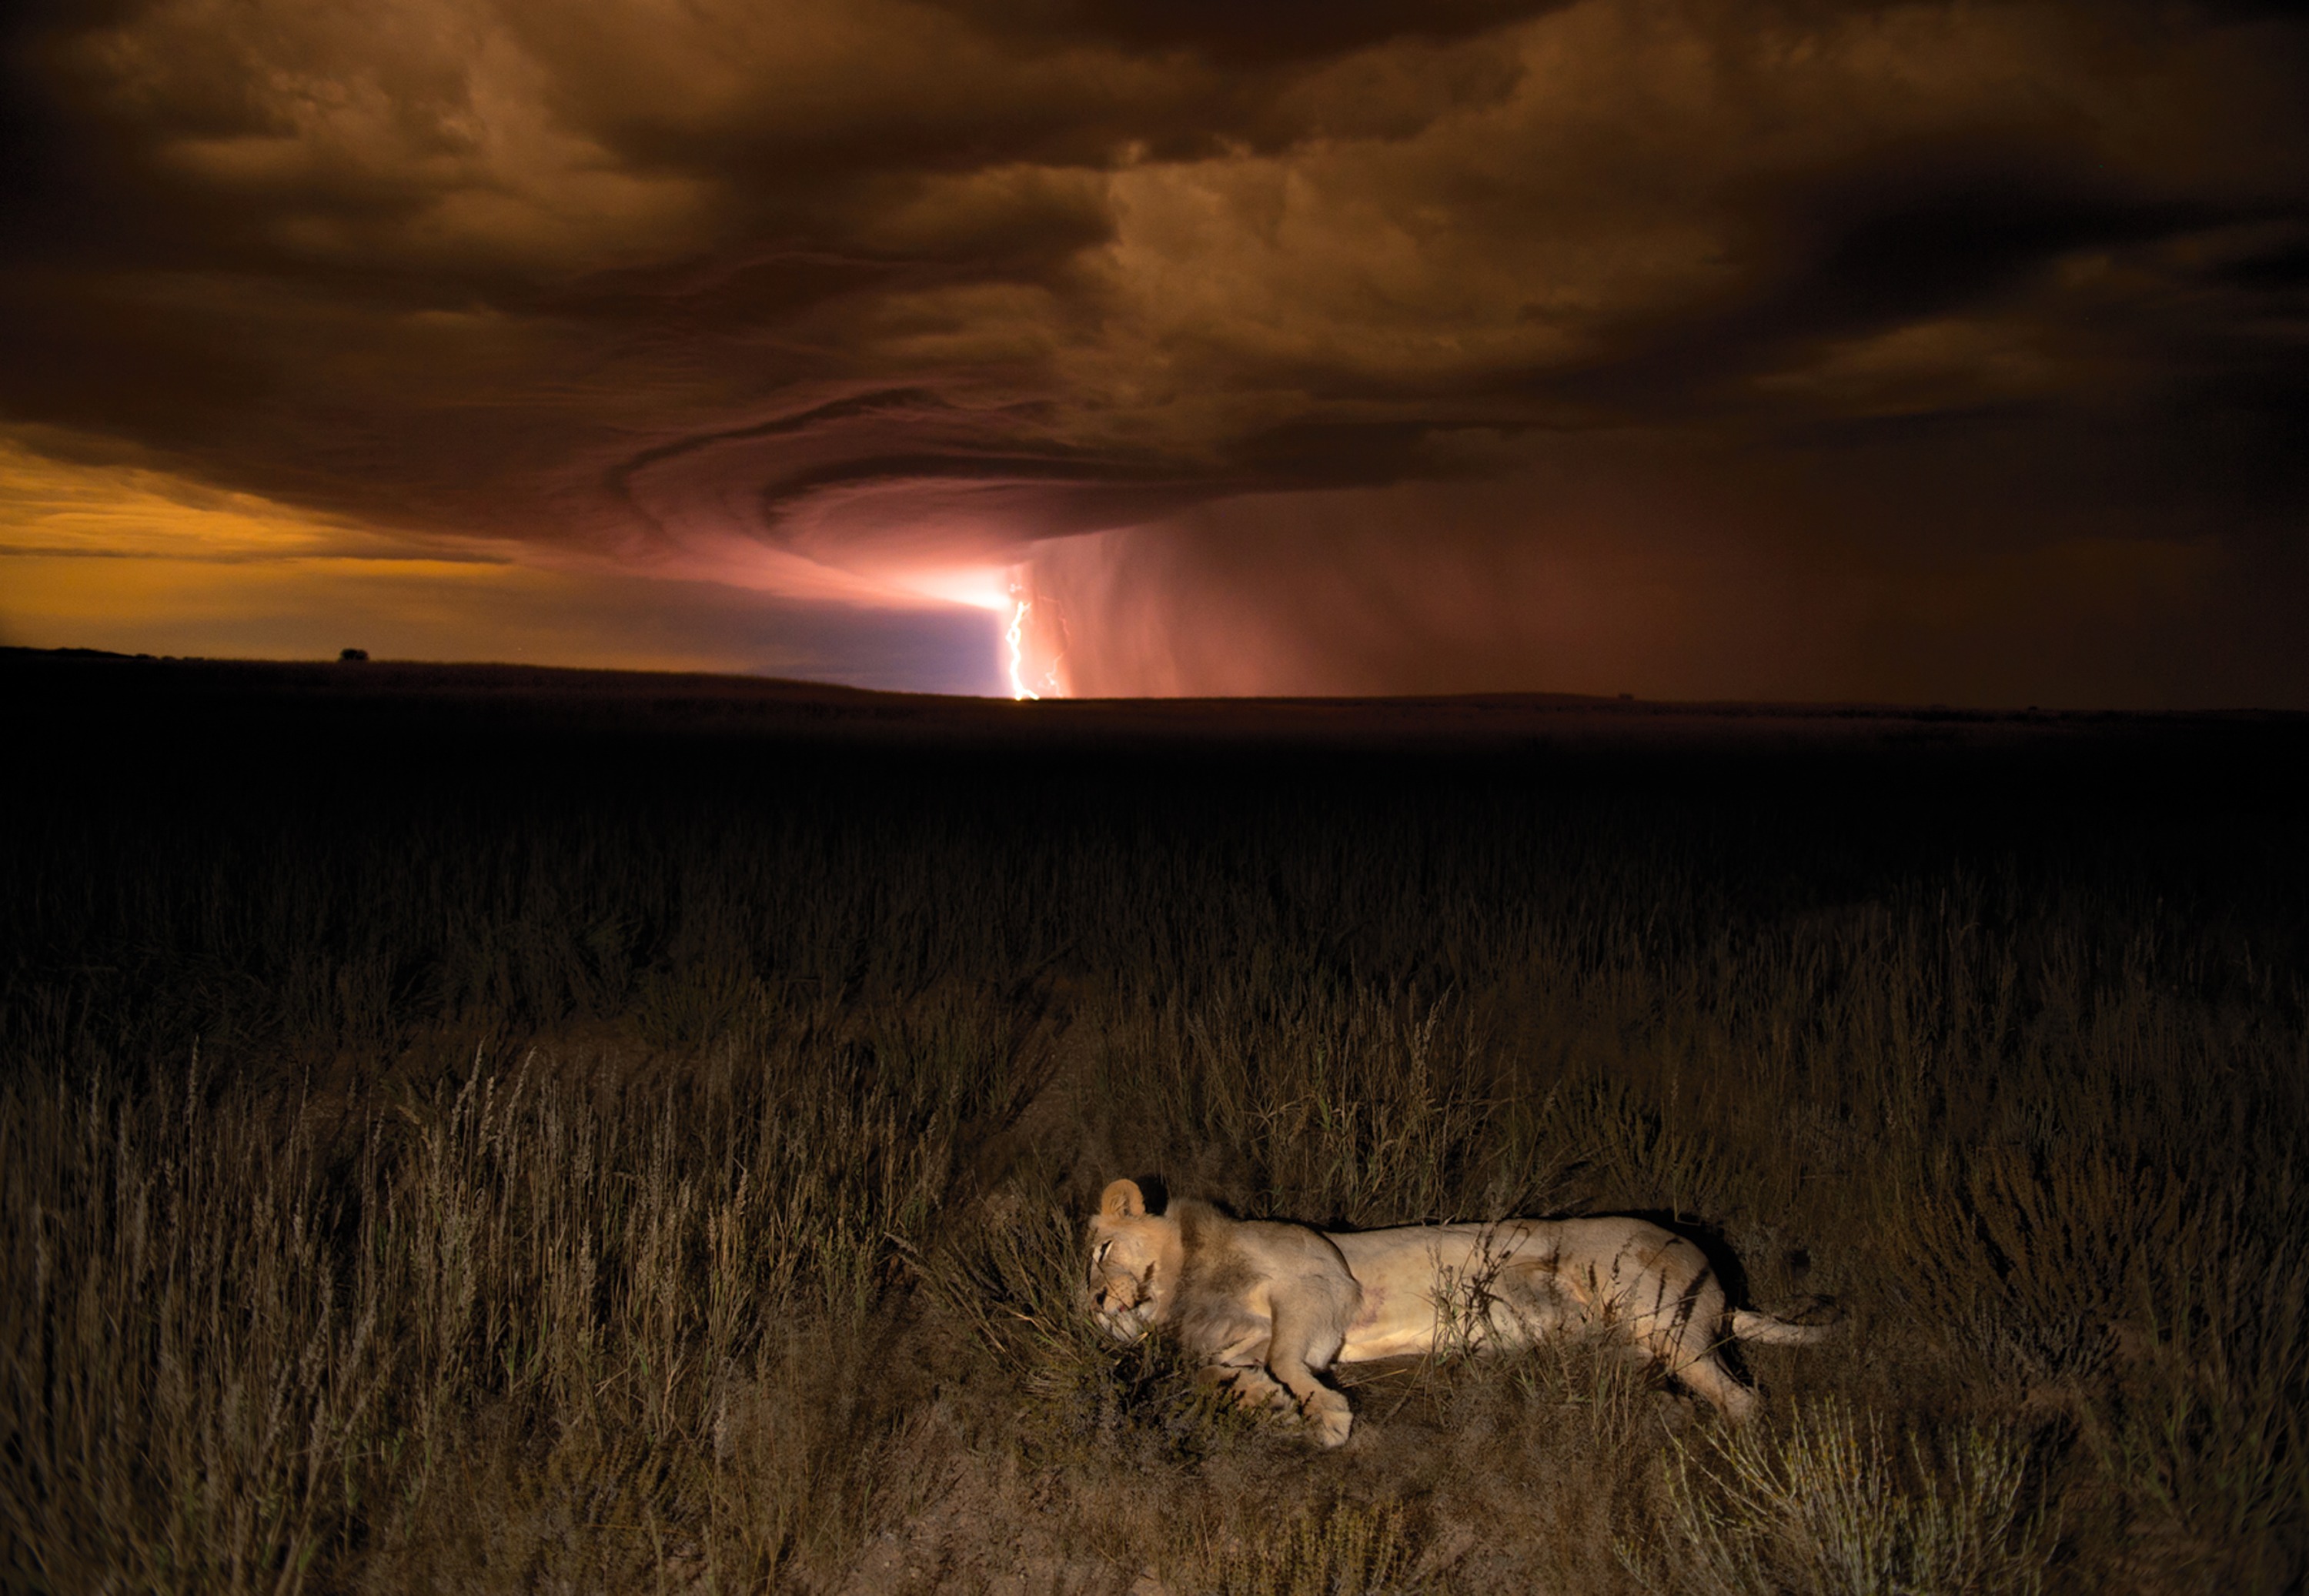 A lion in a storm.